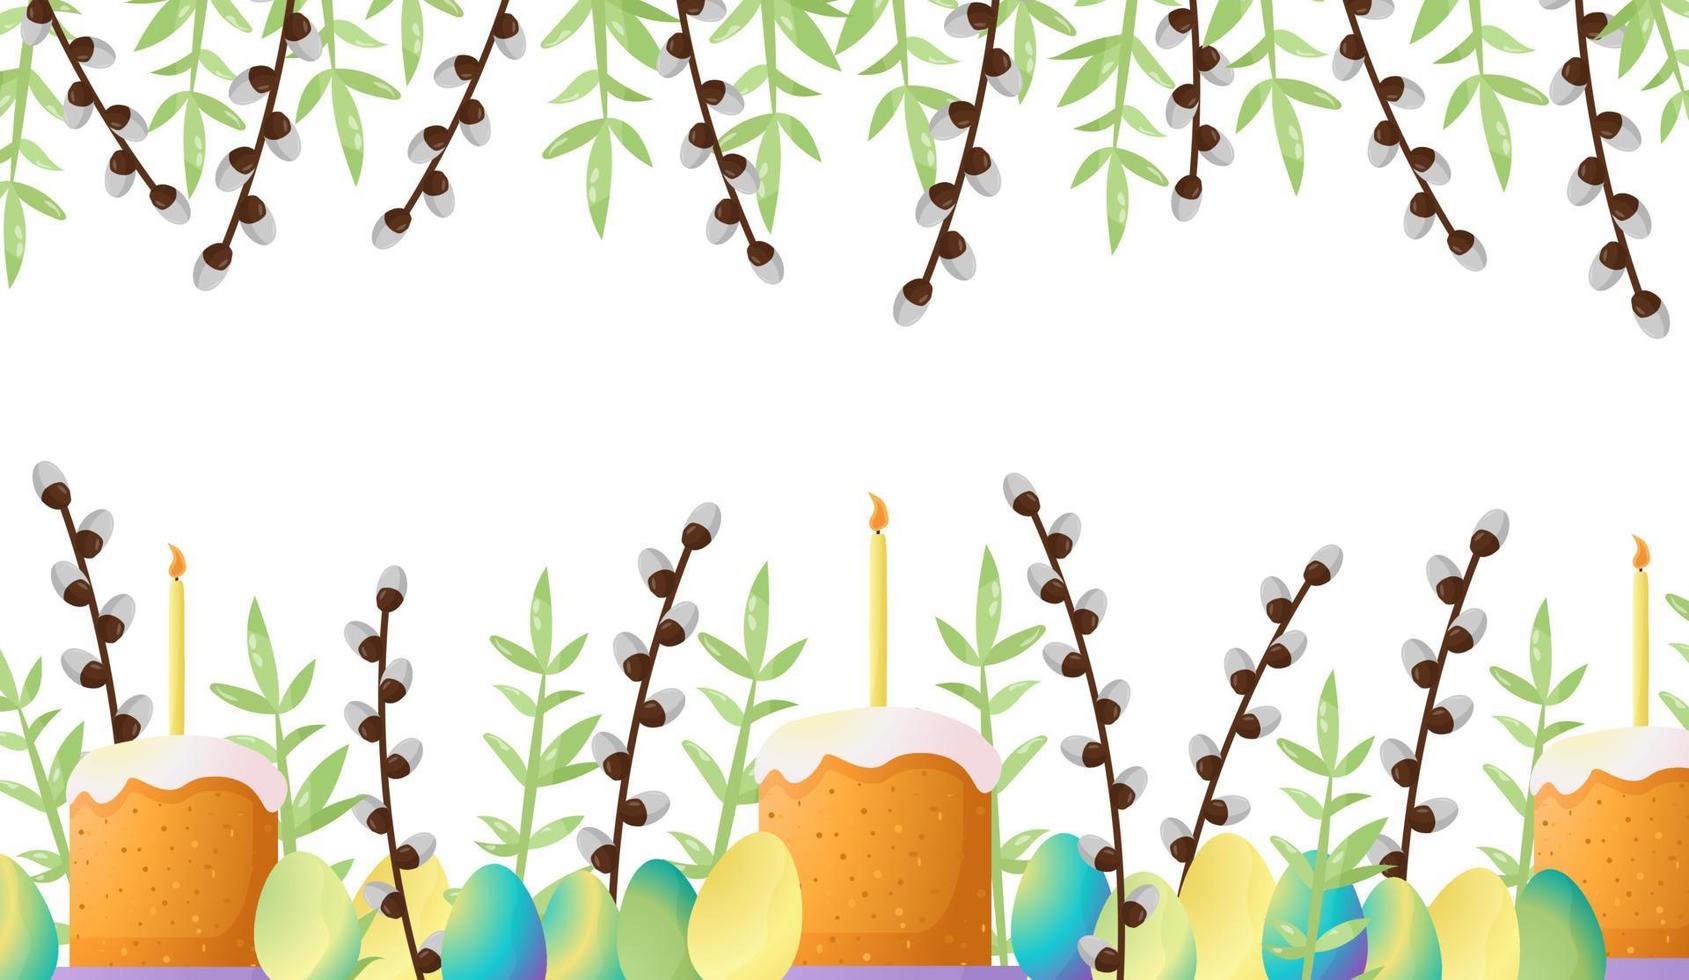 Easter vector background for the design and decoration of a happy Easter holiday. Basket with egg, candles, willow bouquet, foliage, cakes. Easter celebration. Simple cute elements in delicate shades.